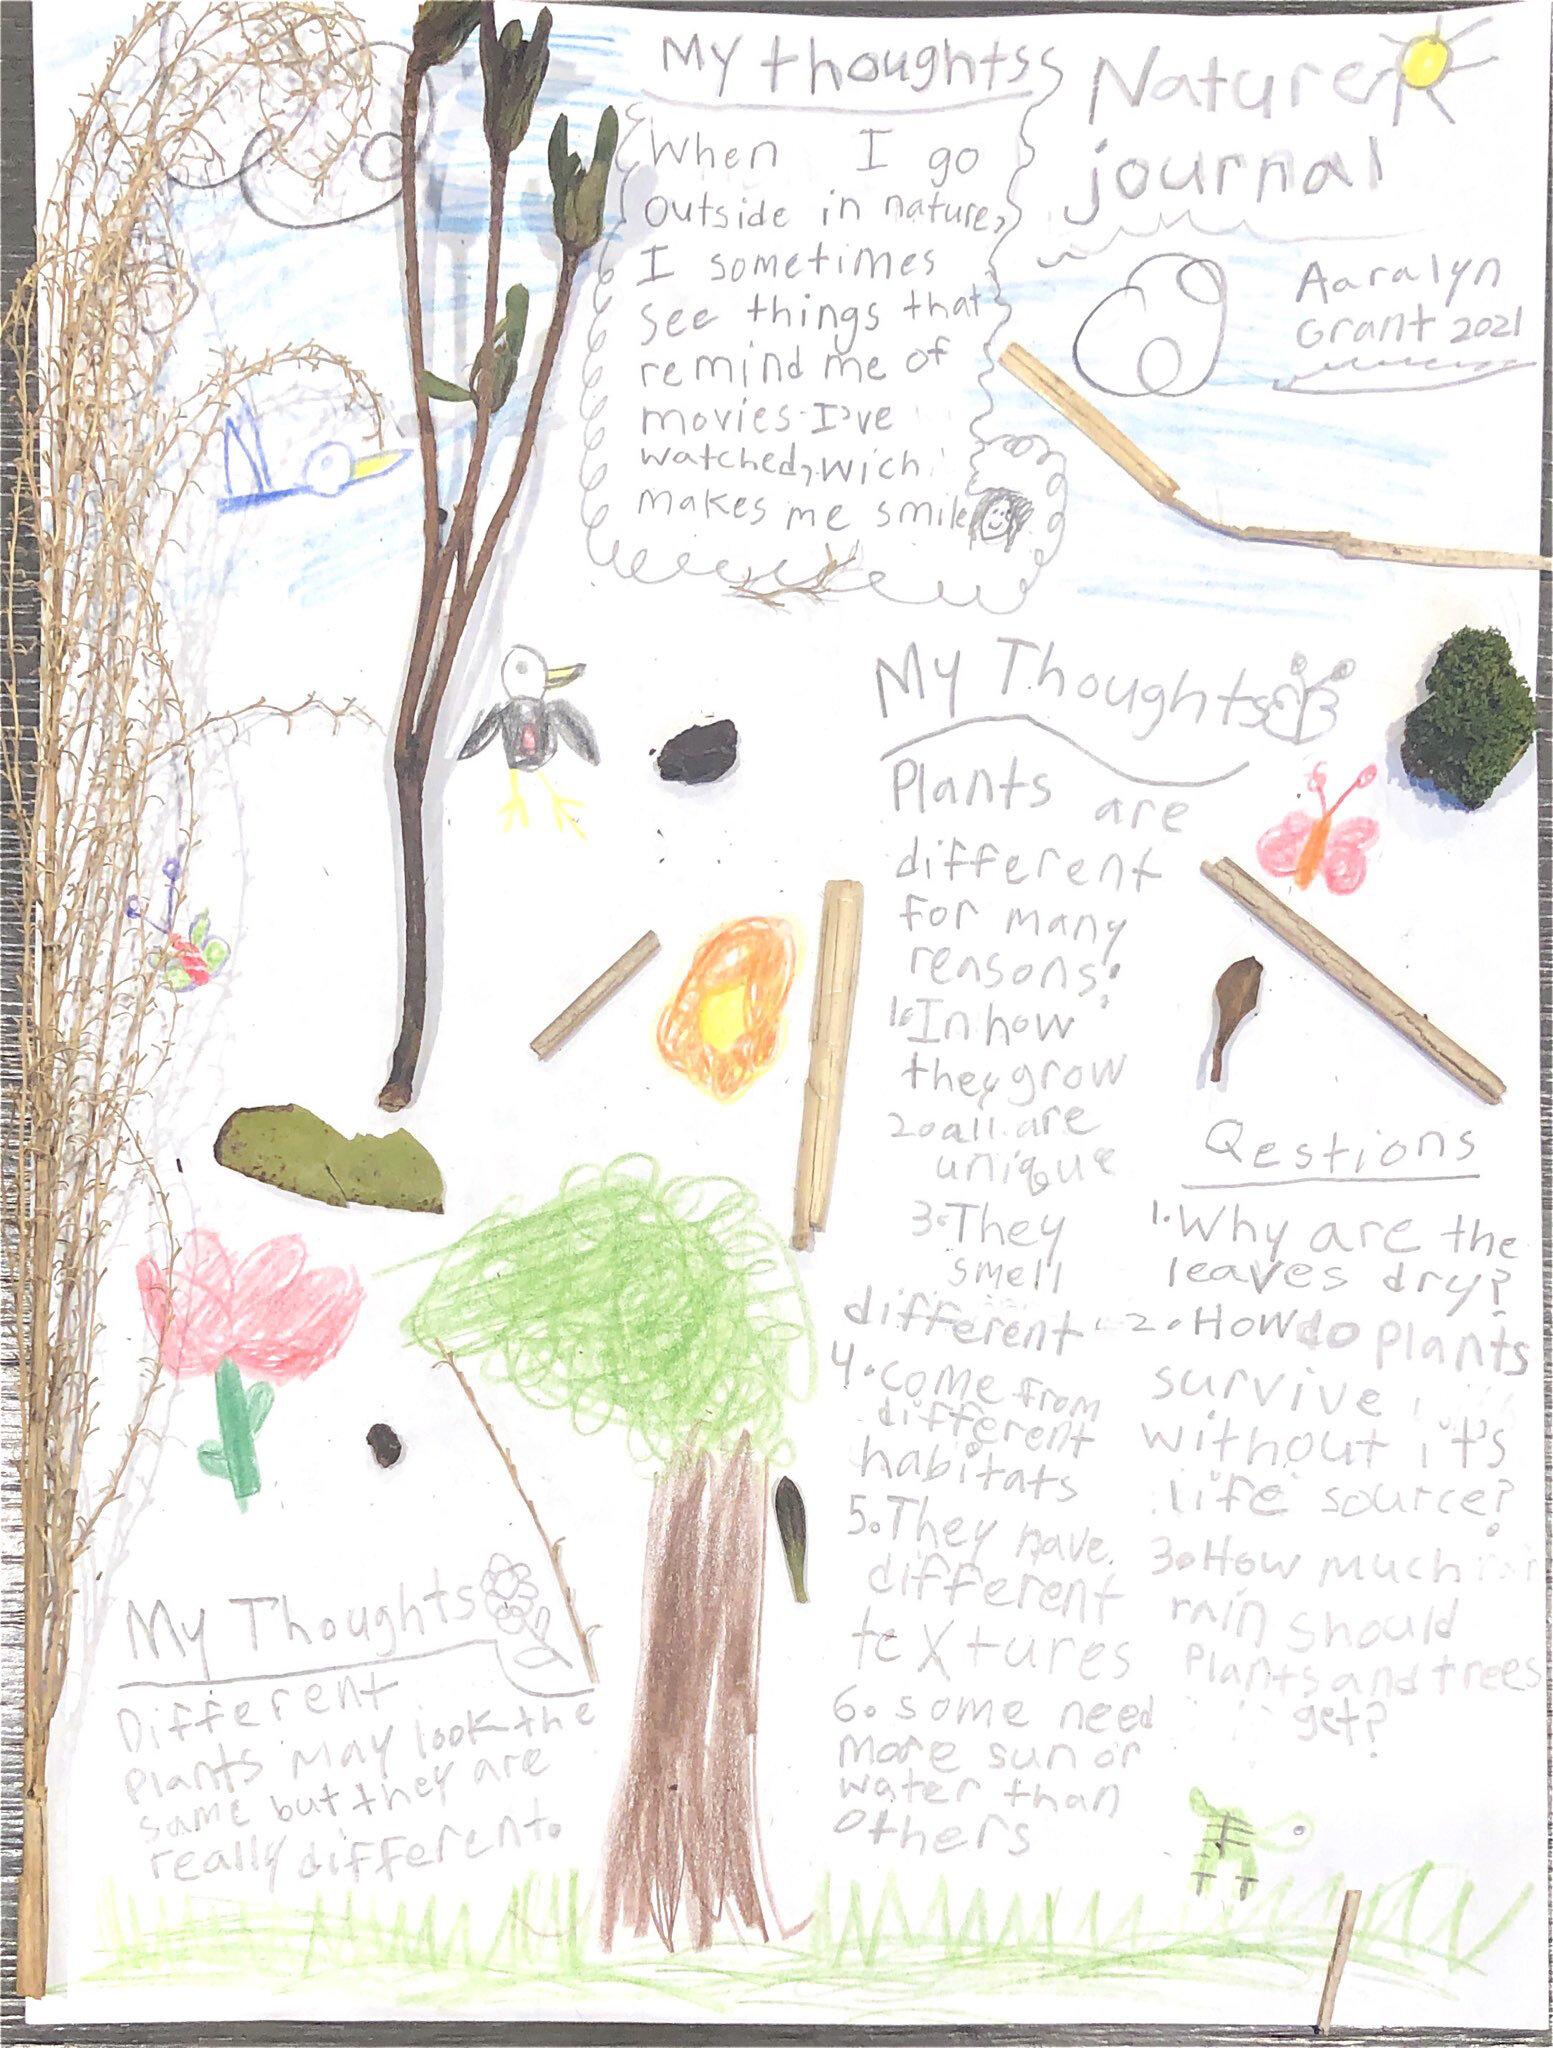 My Nature Journal by Aaralyn Grant - 2nd Place - Grades 1-2